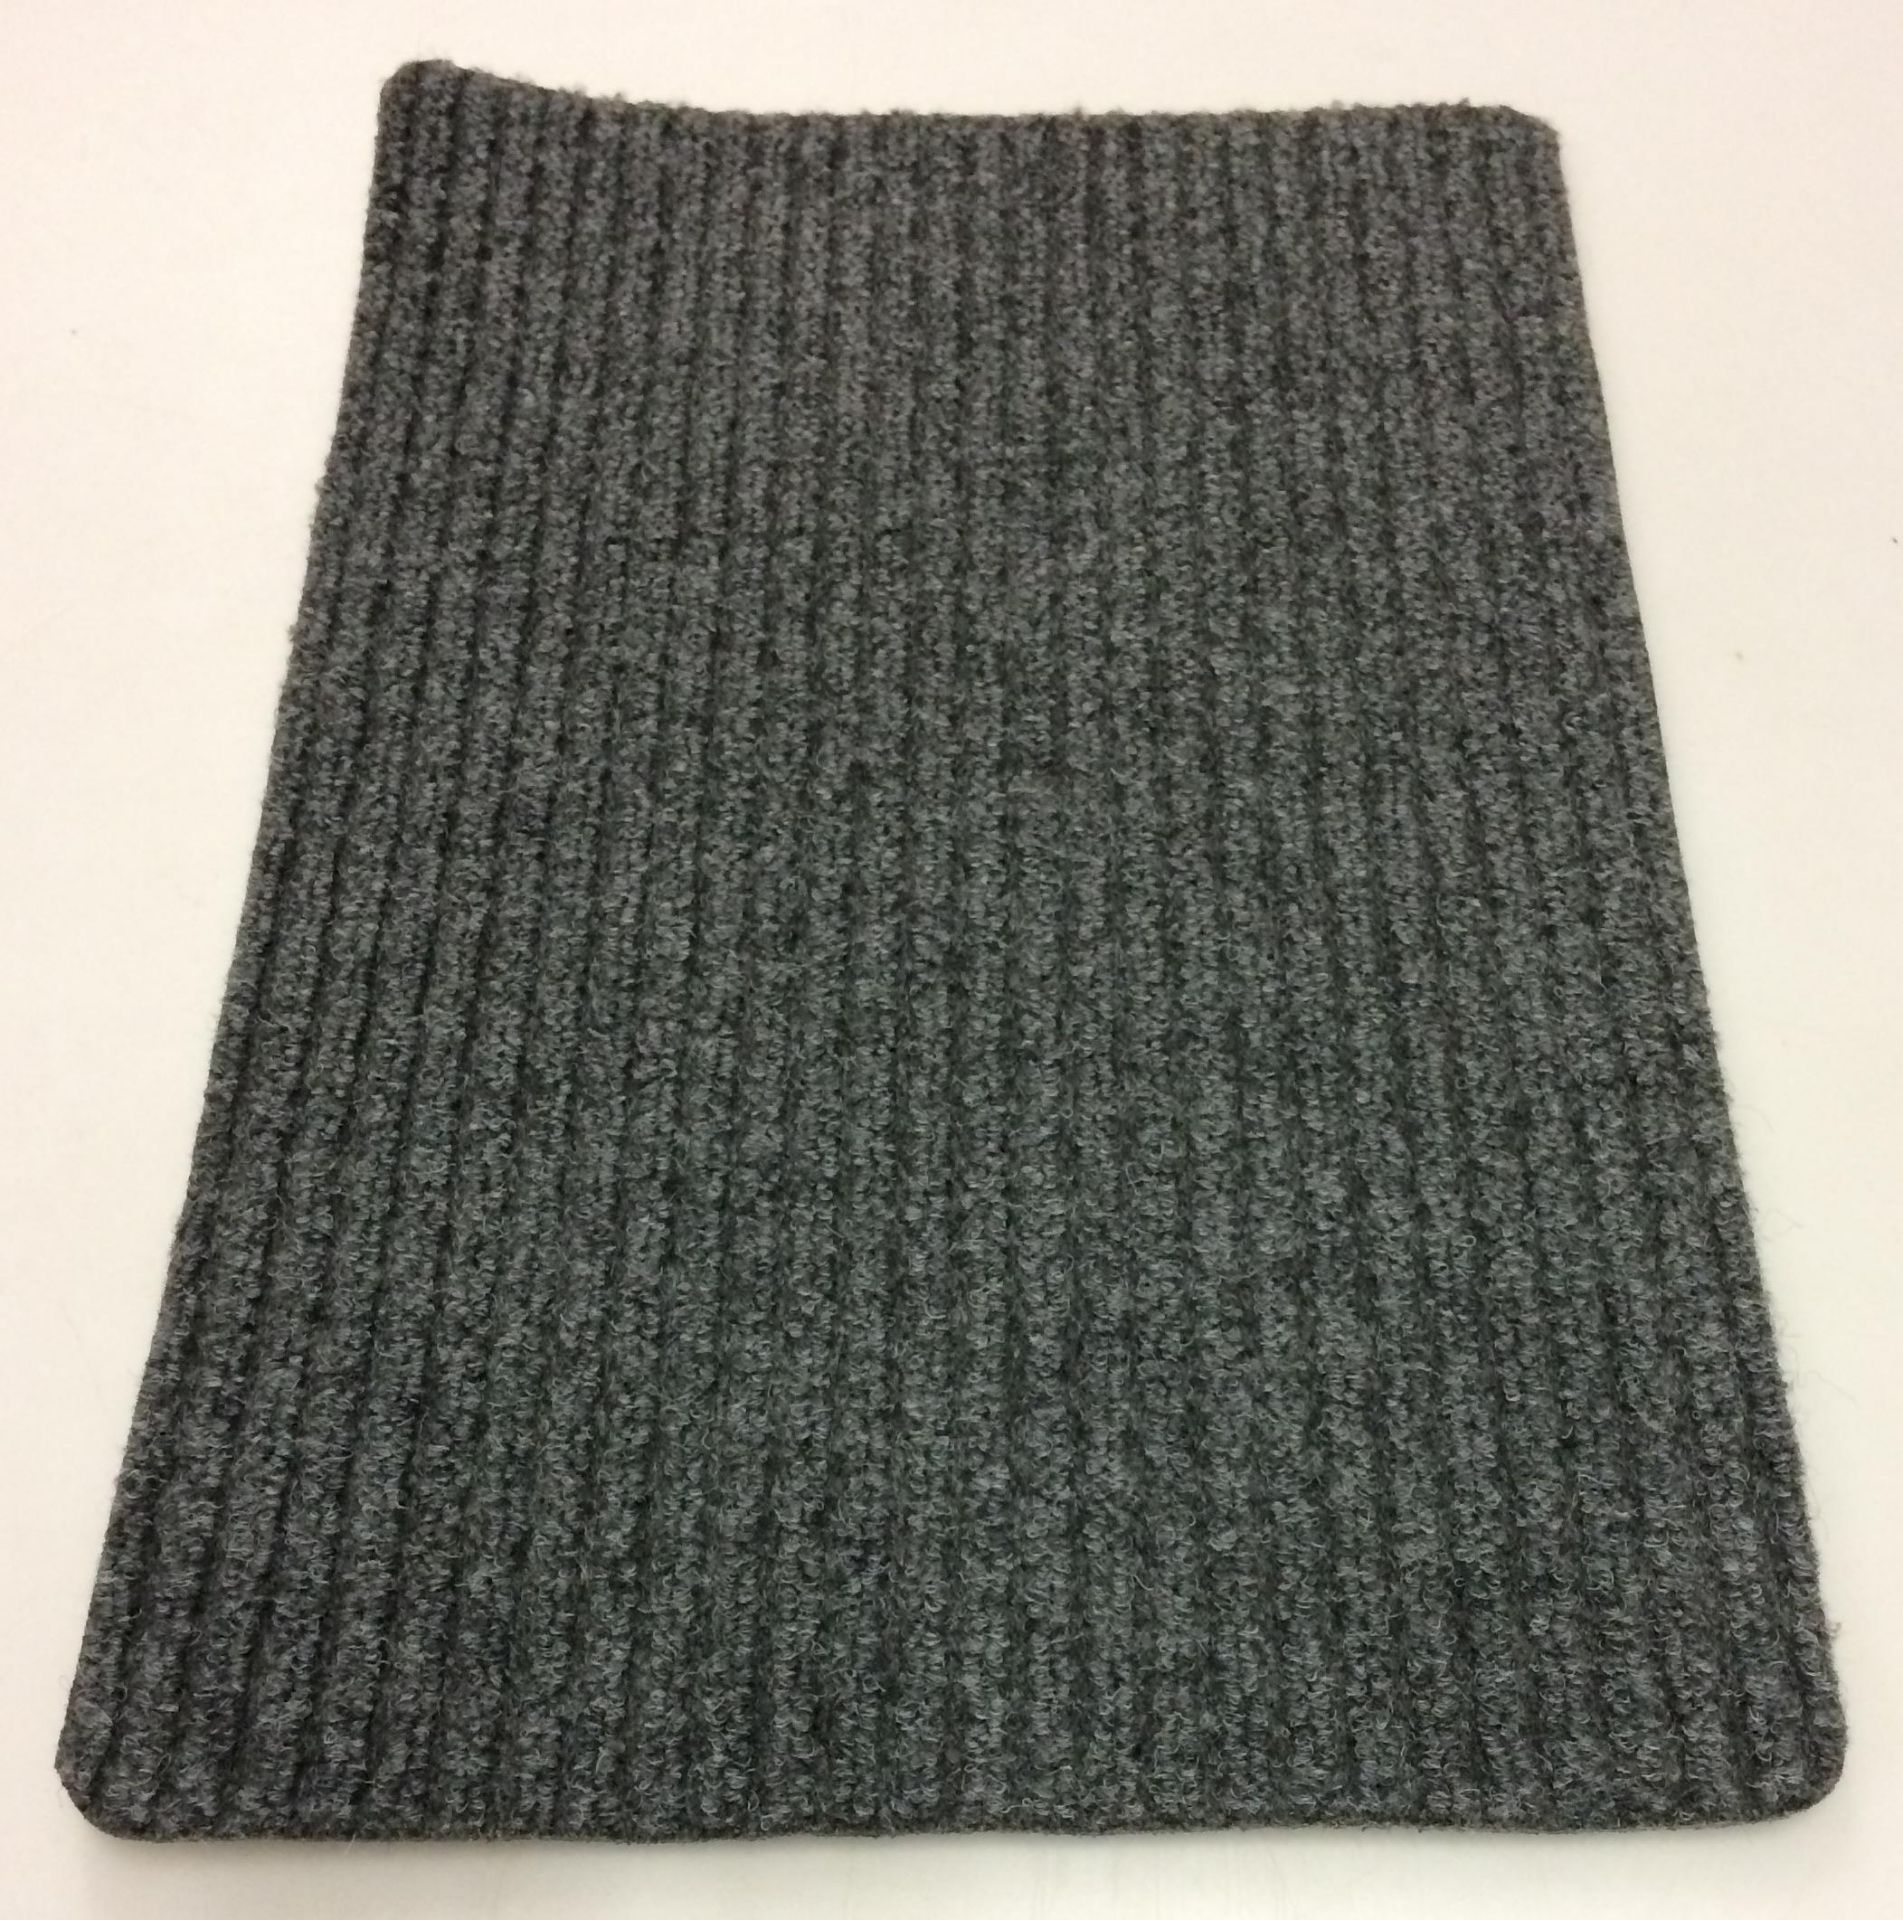 20 x blue door mats with anti-slip rubber backing 40 x 60cm